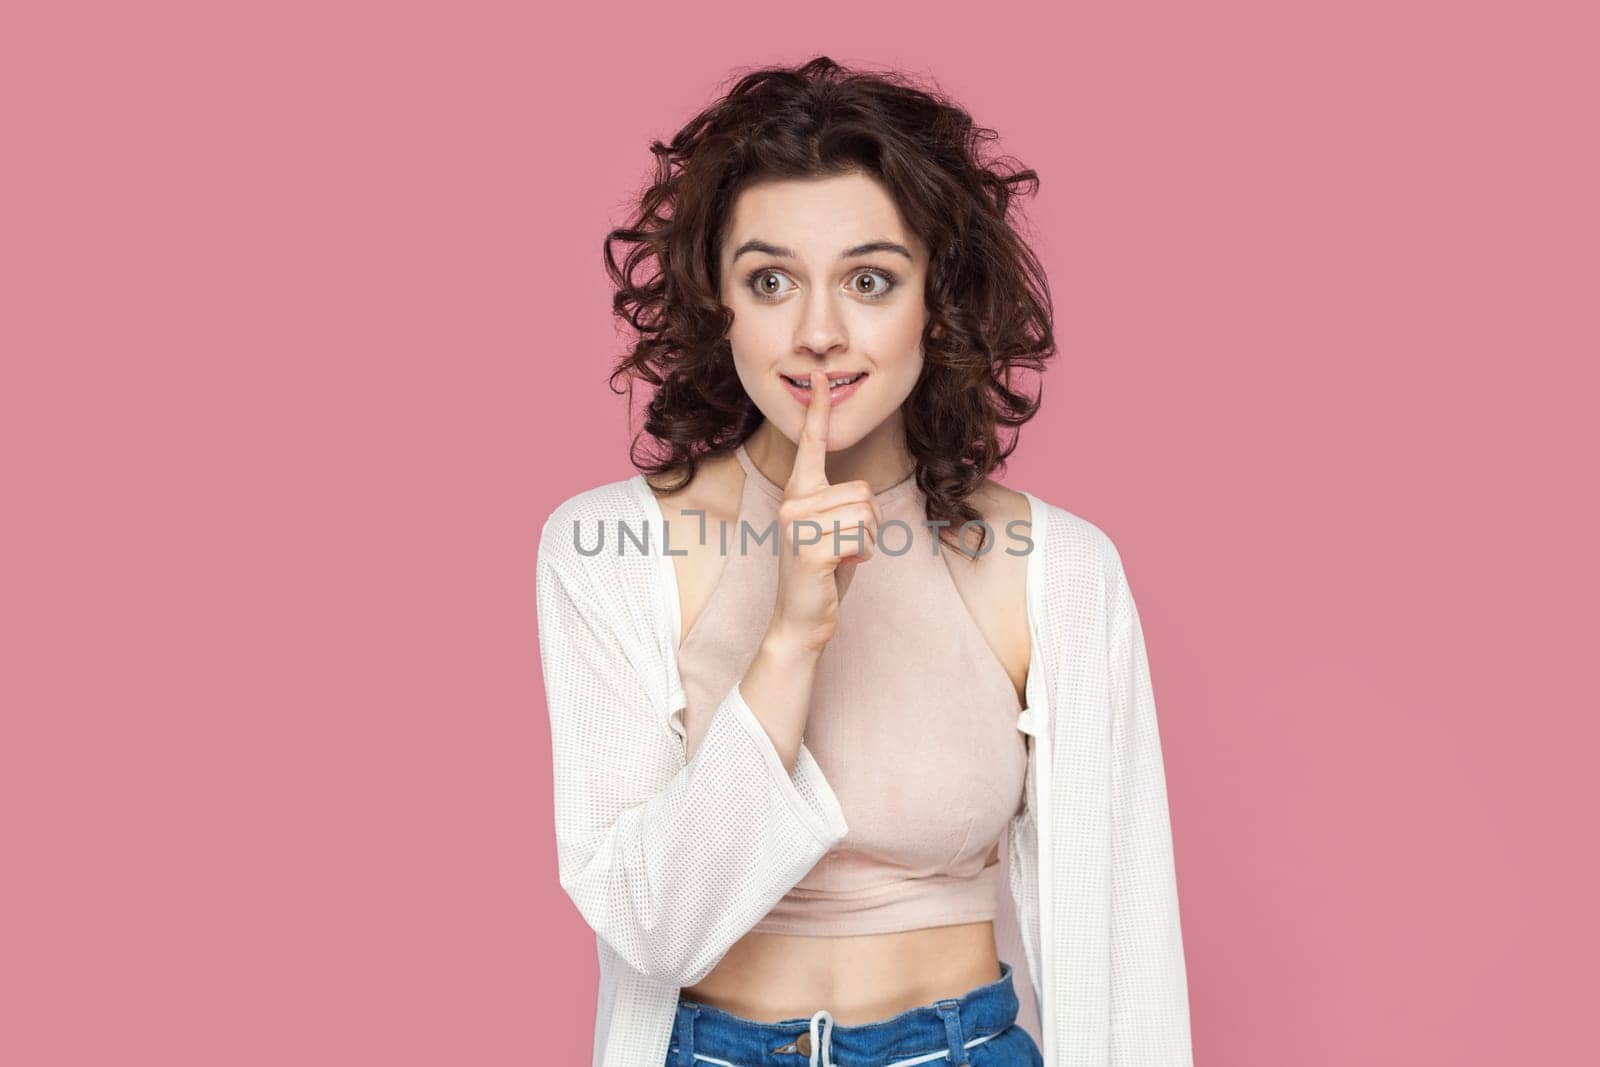 Portrait of positive smiling woman with curly hairstyle wearing casual style outfit showing shh gesture, asking to keep secret. Indoor studio shot isolated on pink background.